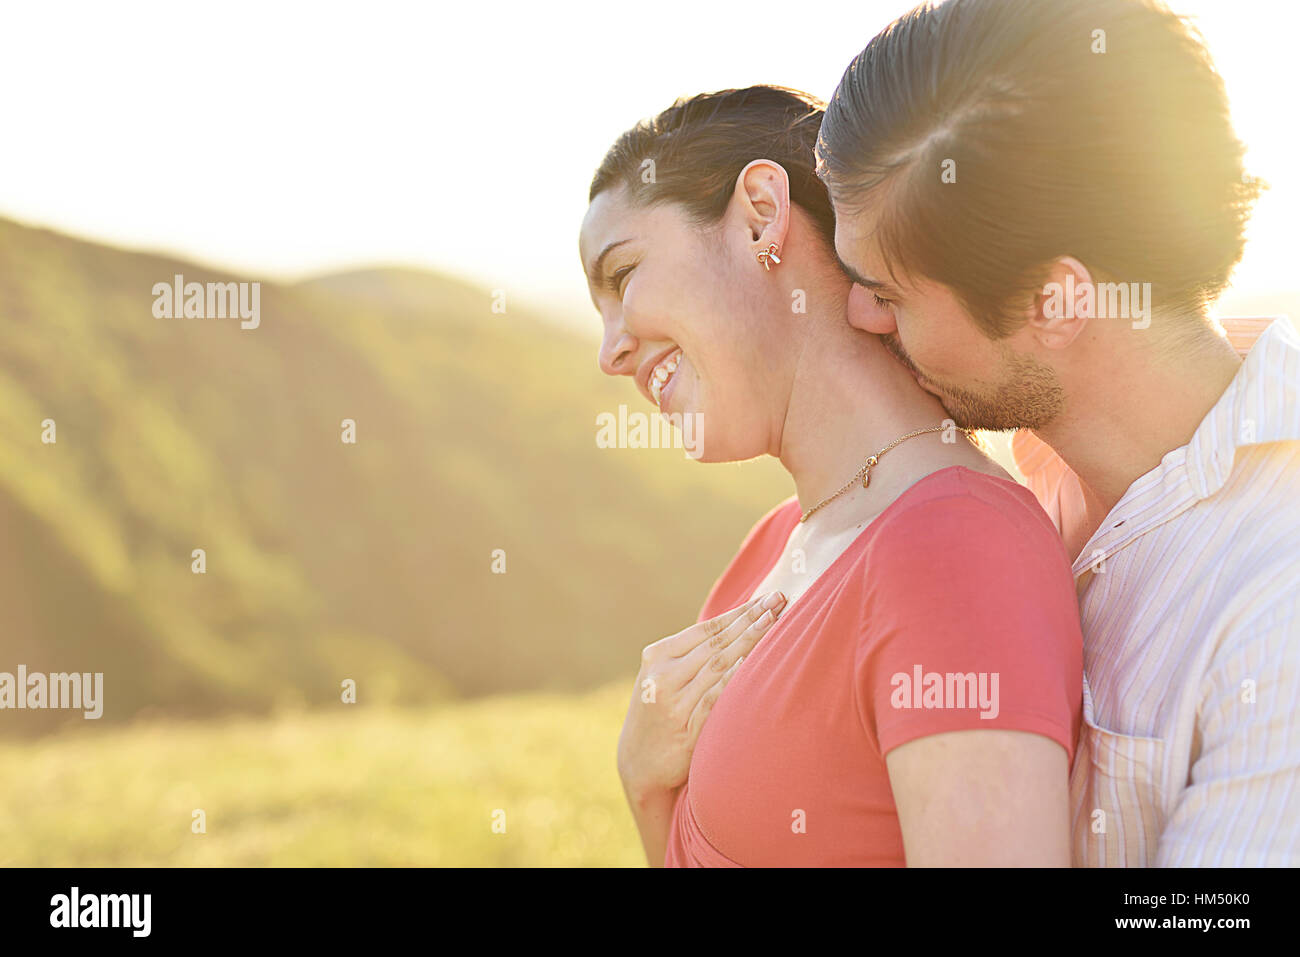 Man hugging and kissing in neck girl on sunny day Stock Photo